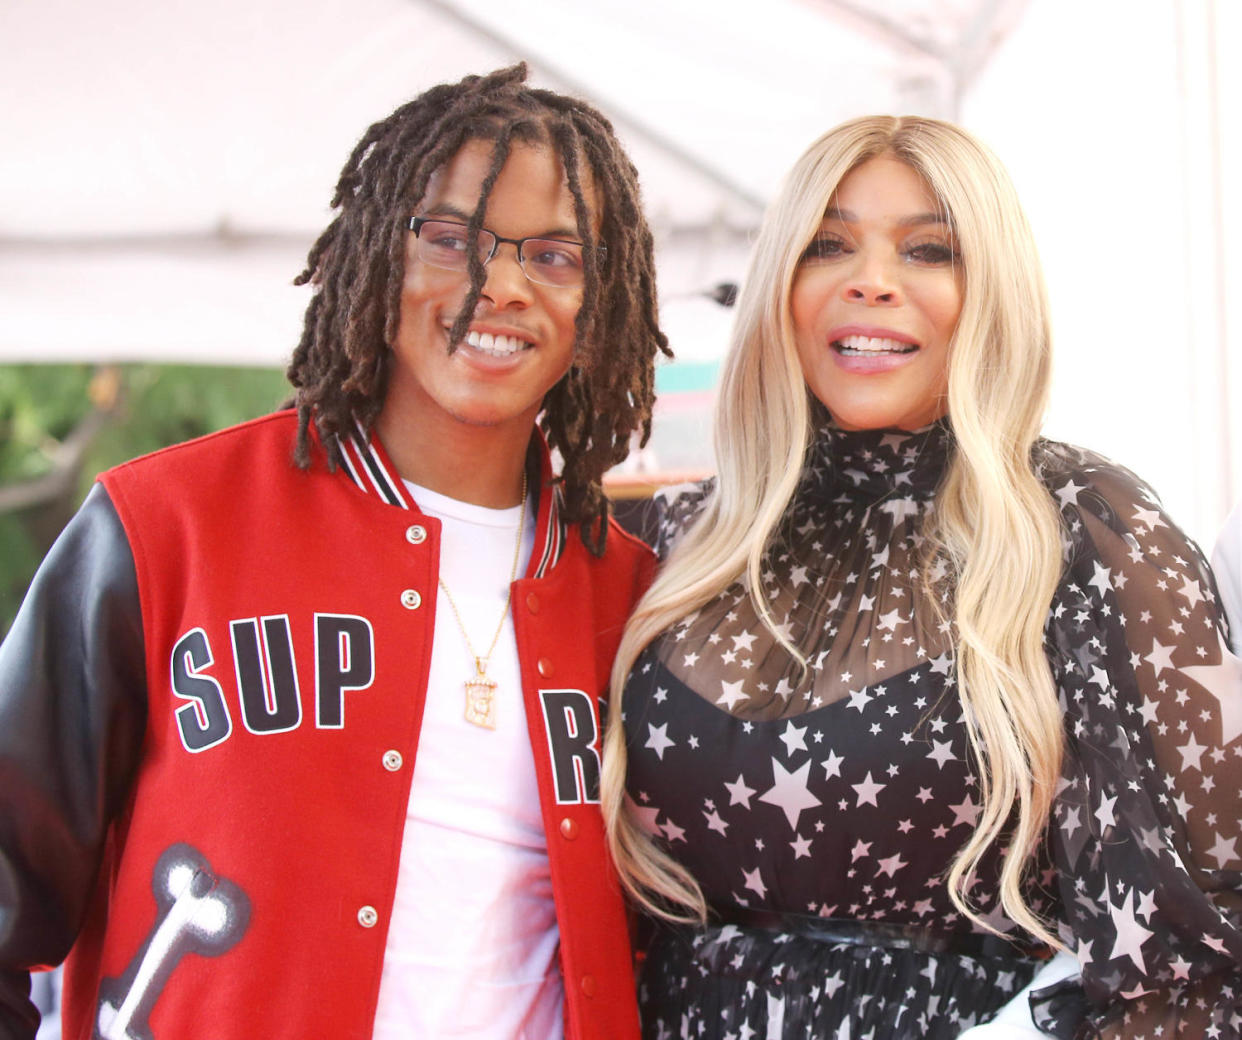 Wendy Williams Honored With Star On The Hollywood Walk Of Fame (Michael Tran / FilmMagic)